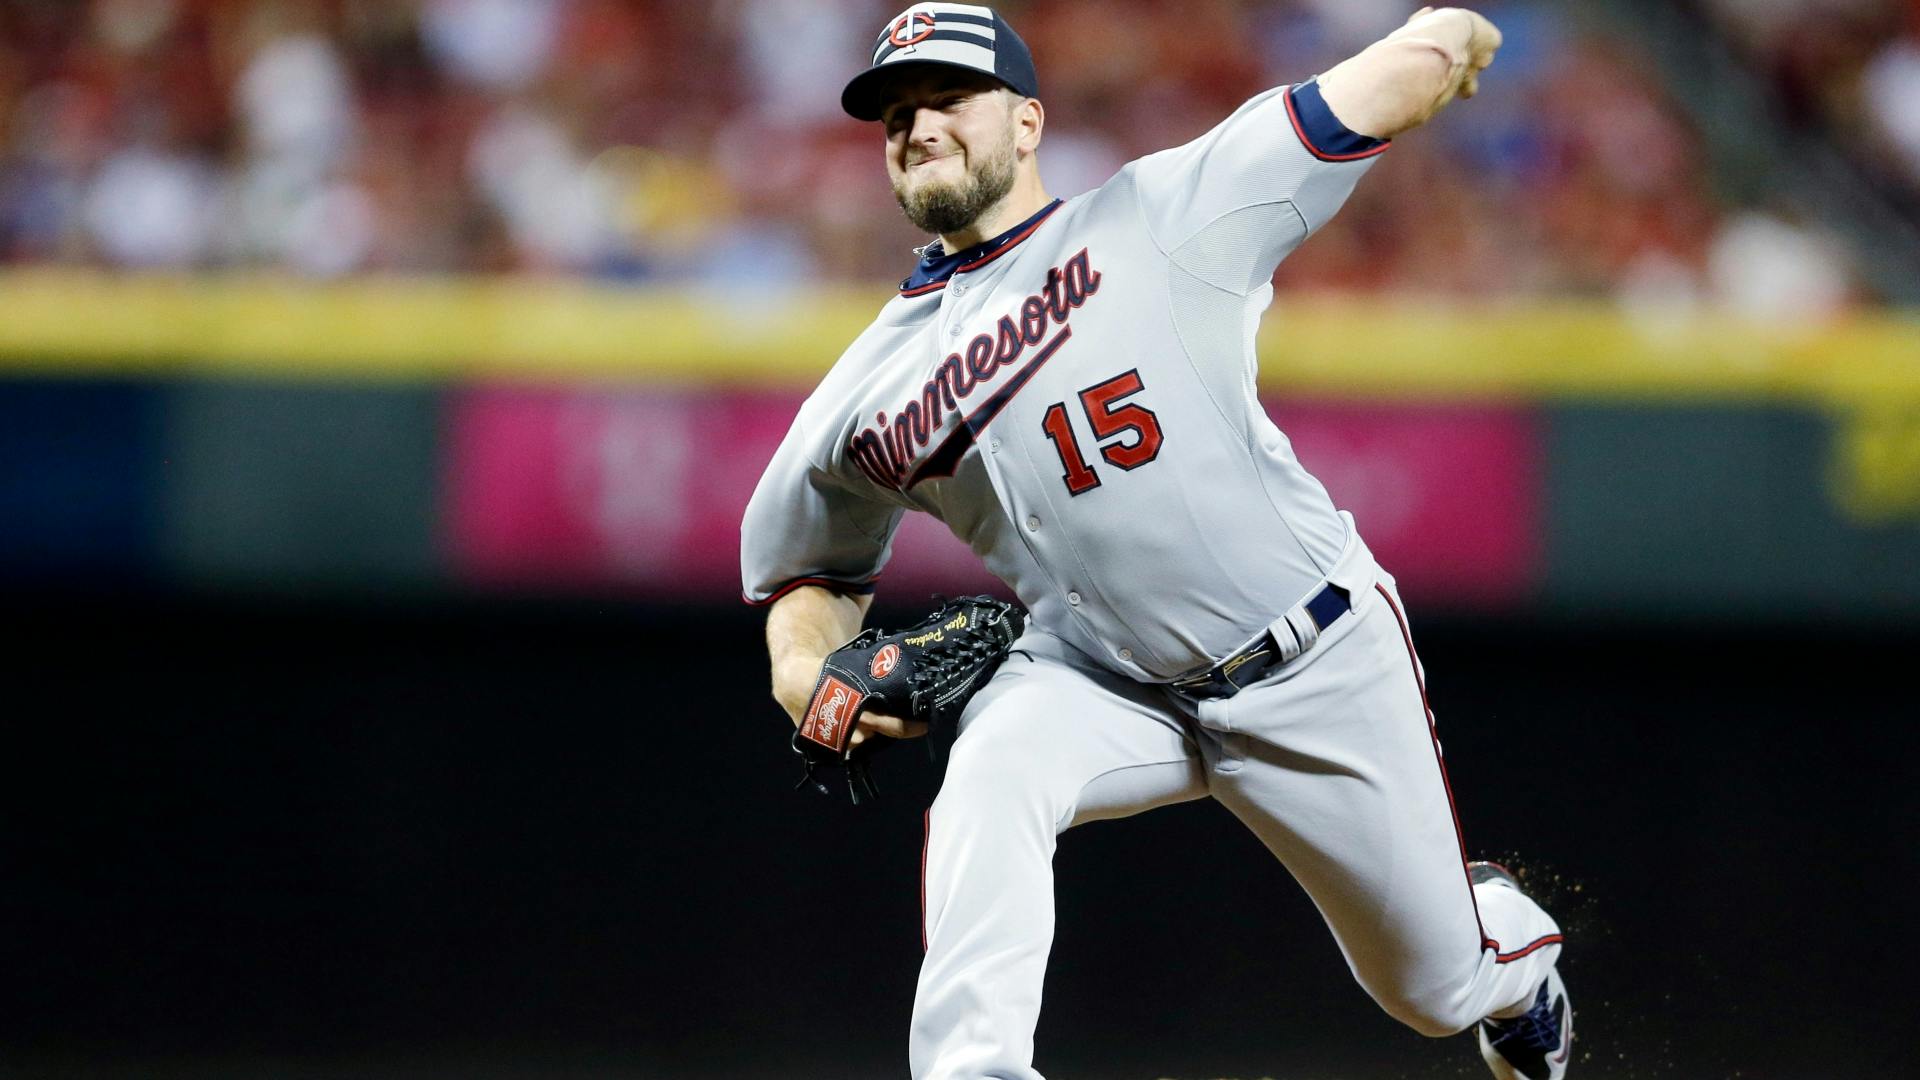 Glen Perkins came in for the American League on Tuesday and and pitched the ninth as the AL prevailed in the All-Star Game.